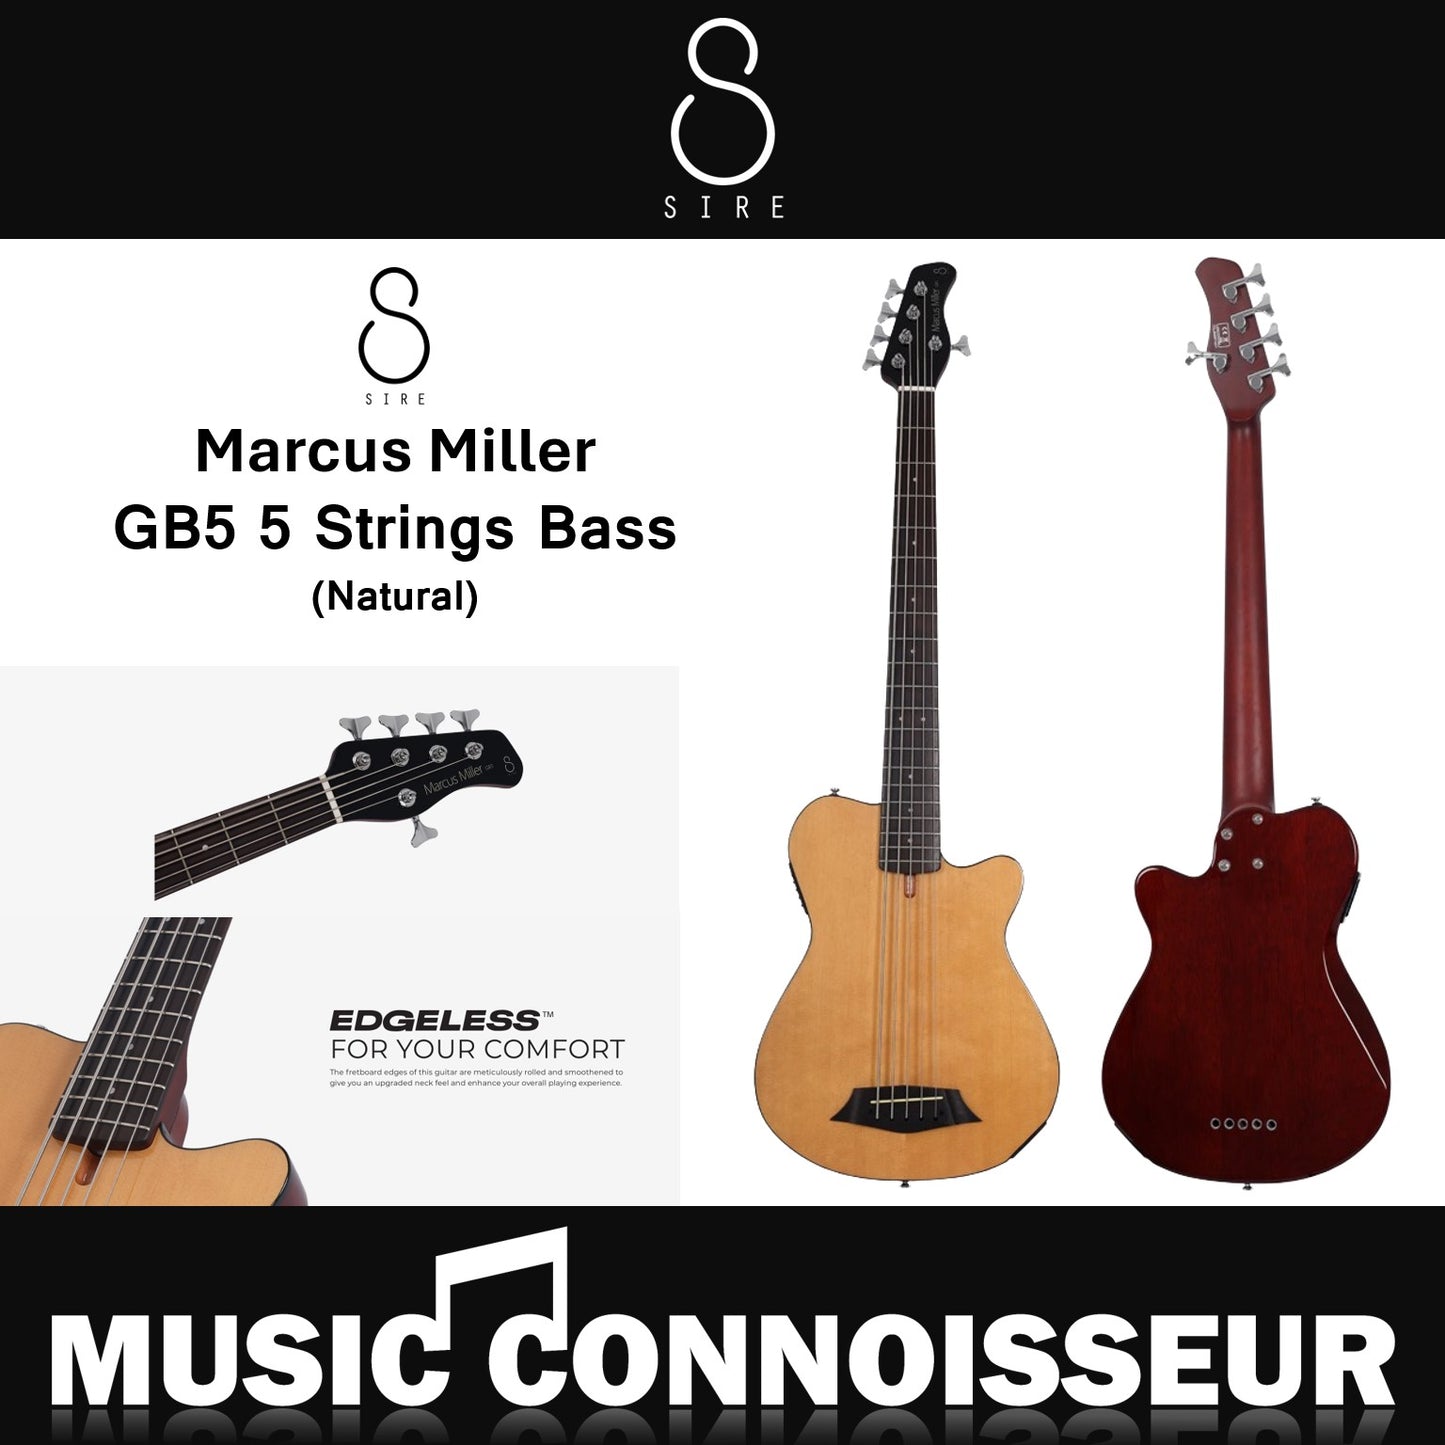 Sire Marcus Miller GB5 5 Strings Bass (Natural)